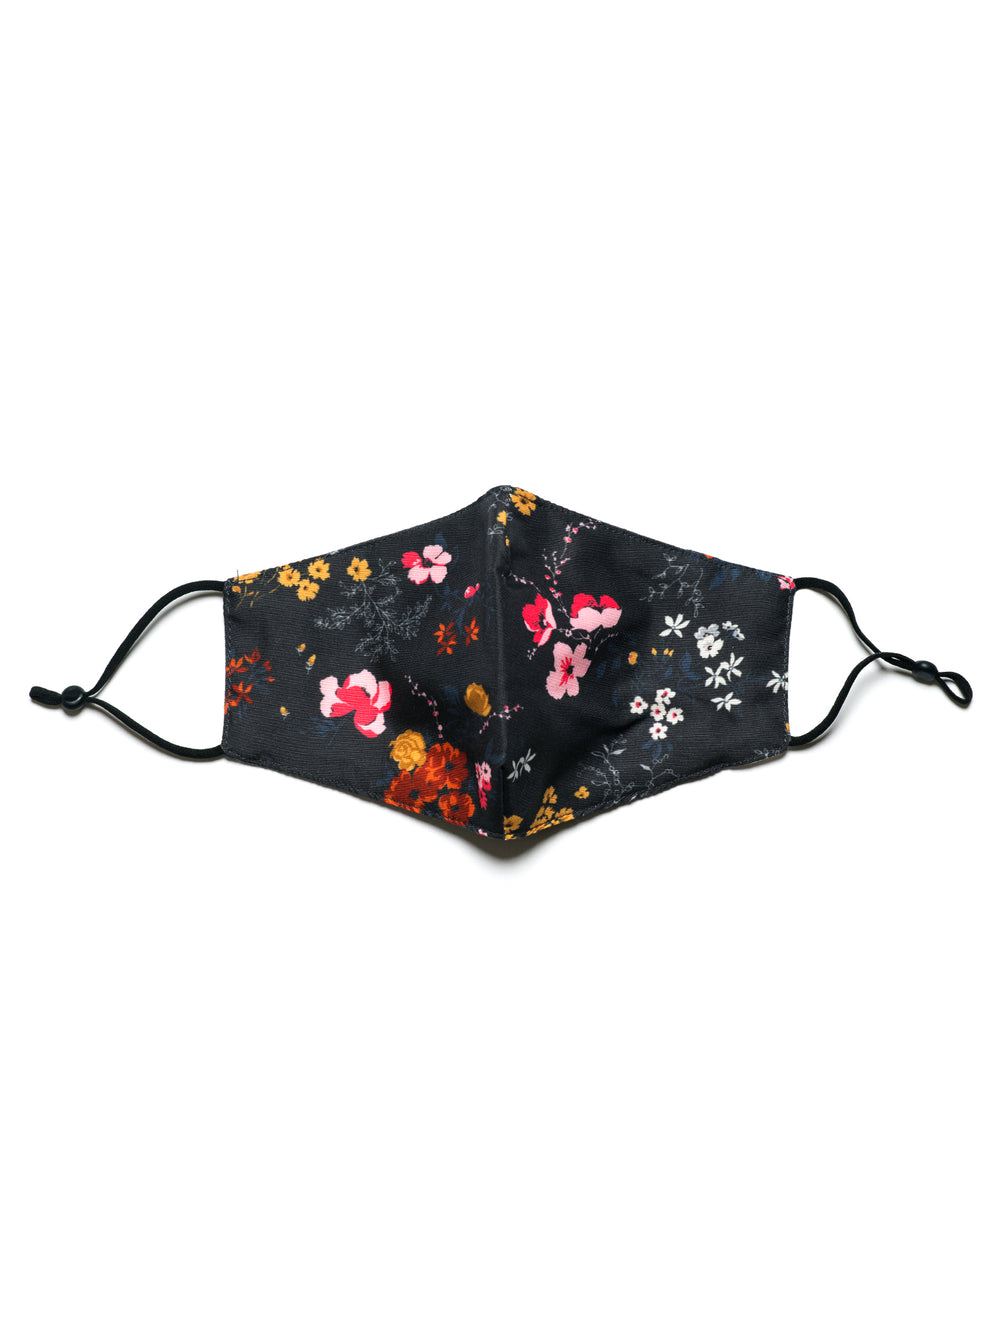 SCOUT & TRAIL FACE MASK - FLORAL - CLEARANCE